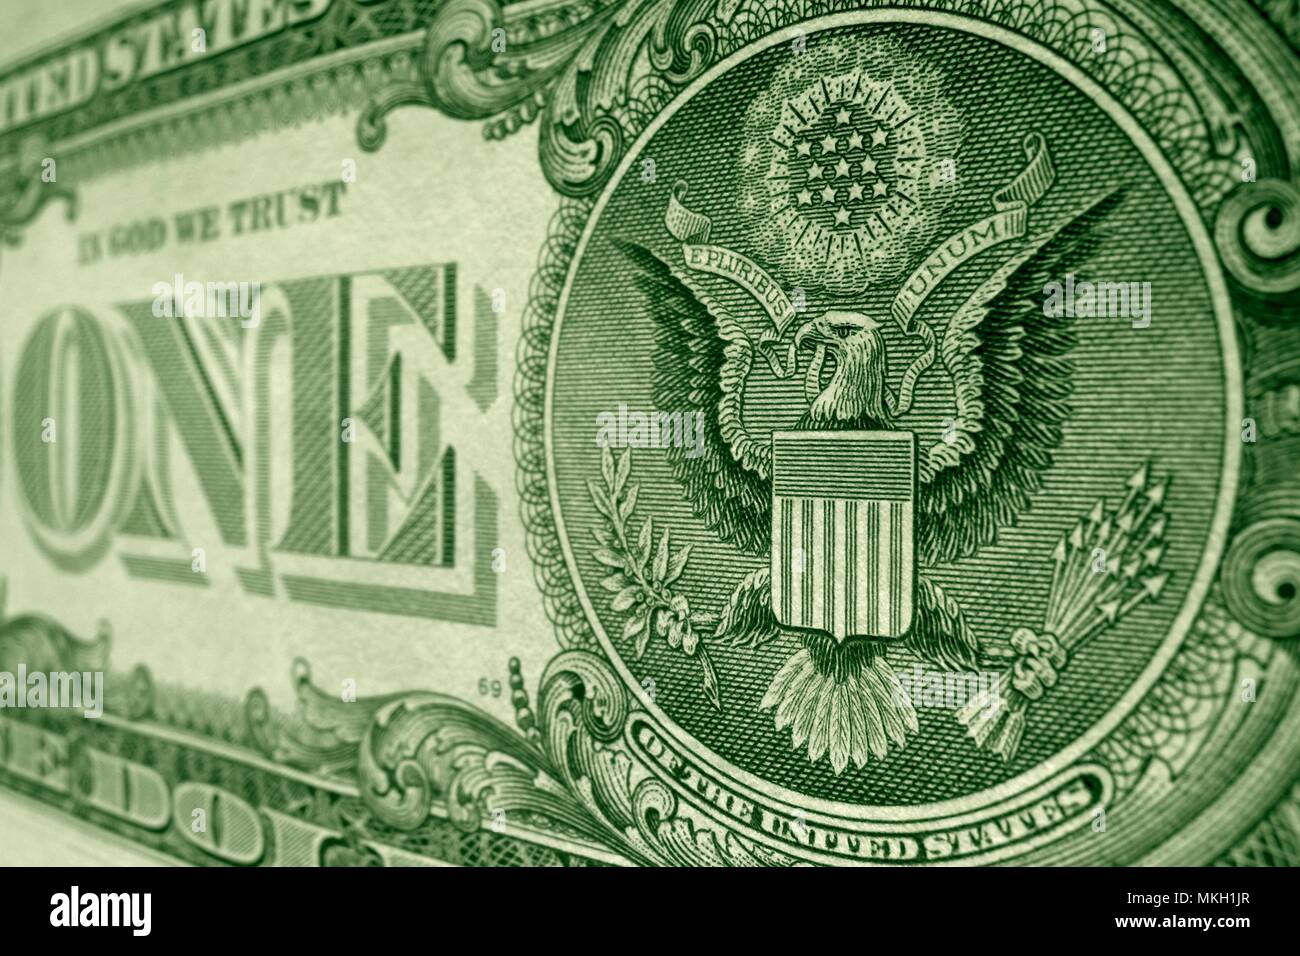 Back Of The Us One Dollar Bill Featuring The American Eagle Stock